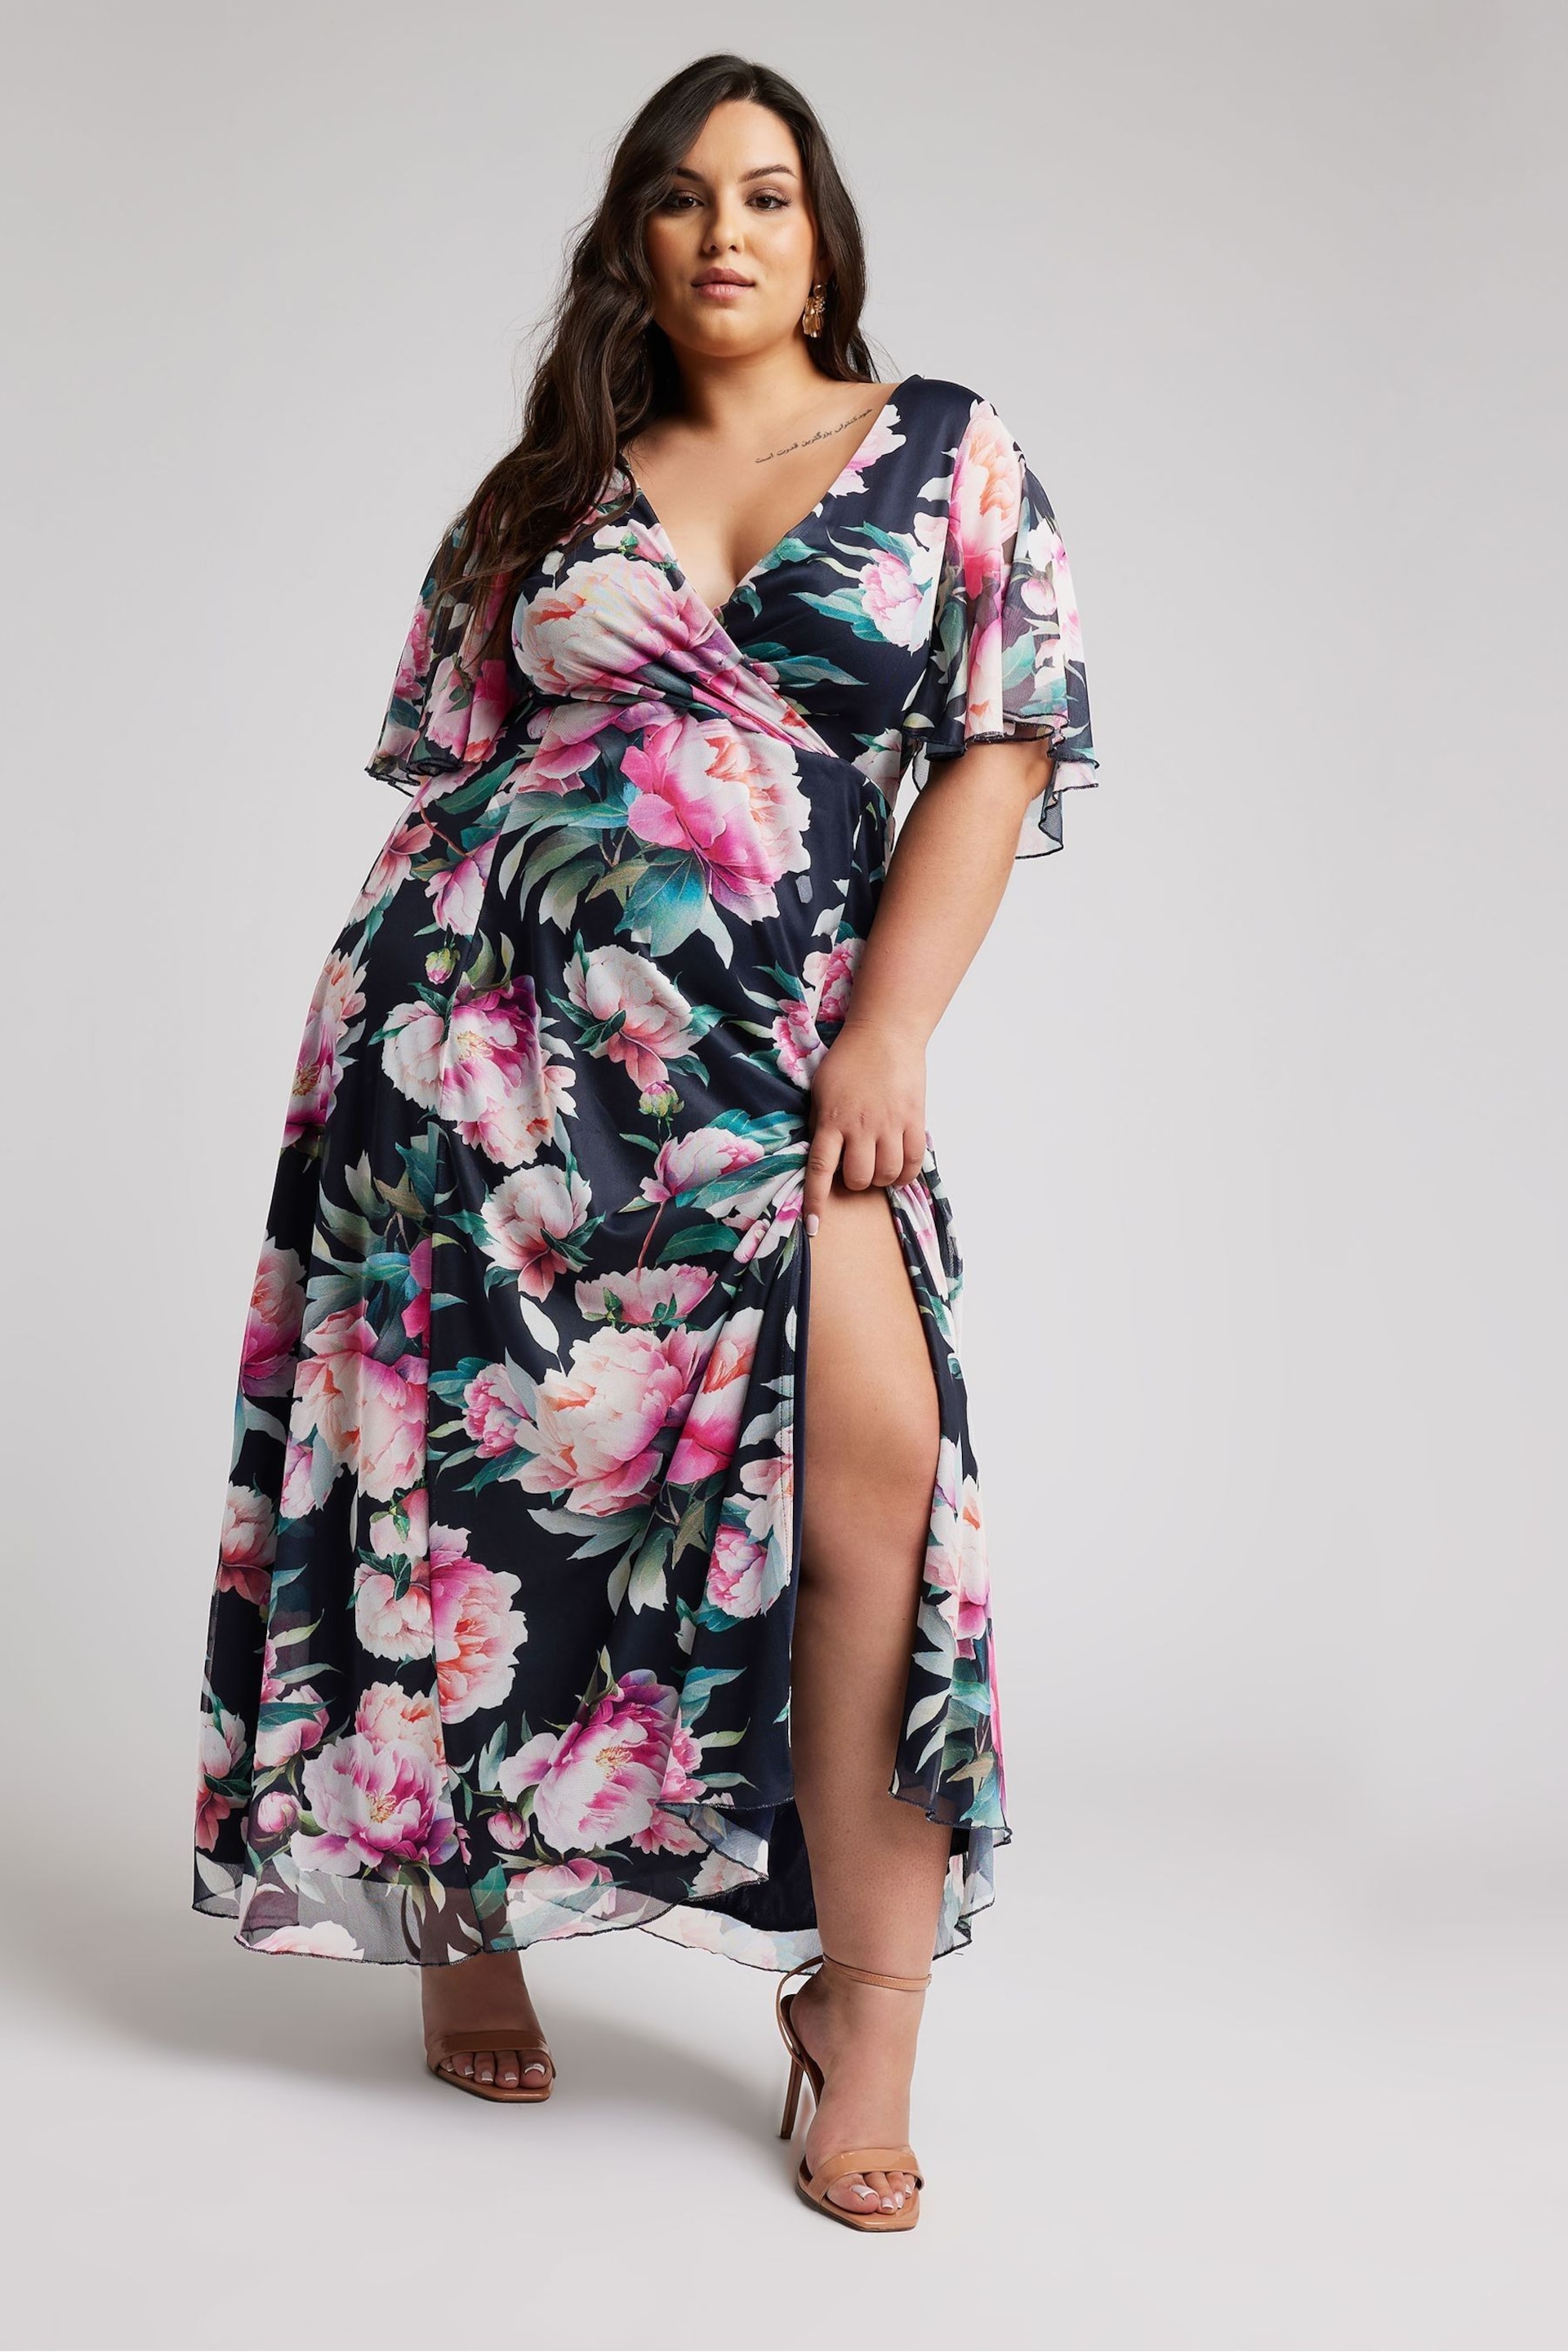 Yours London Curve Navy Blue Floral Print Wrap Maxi Dress - Image 2 of 5